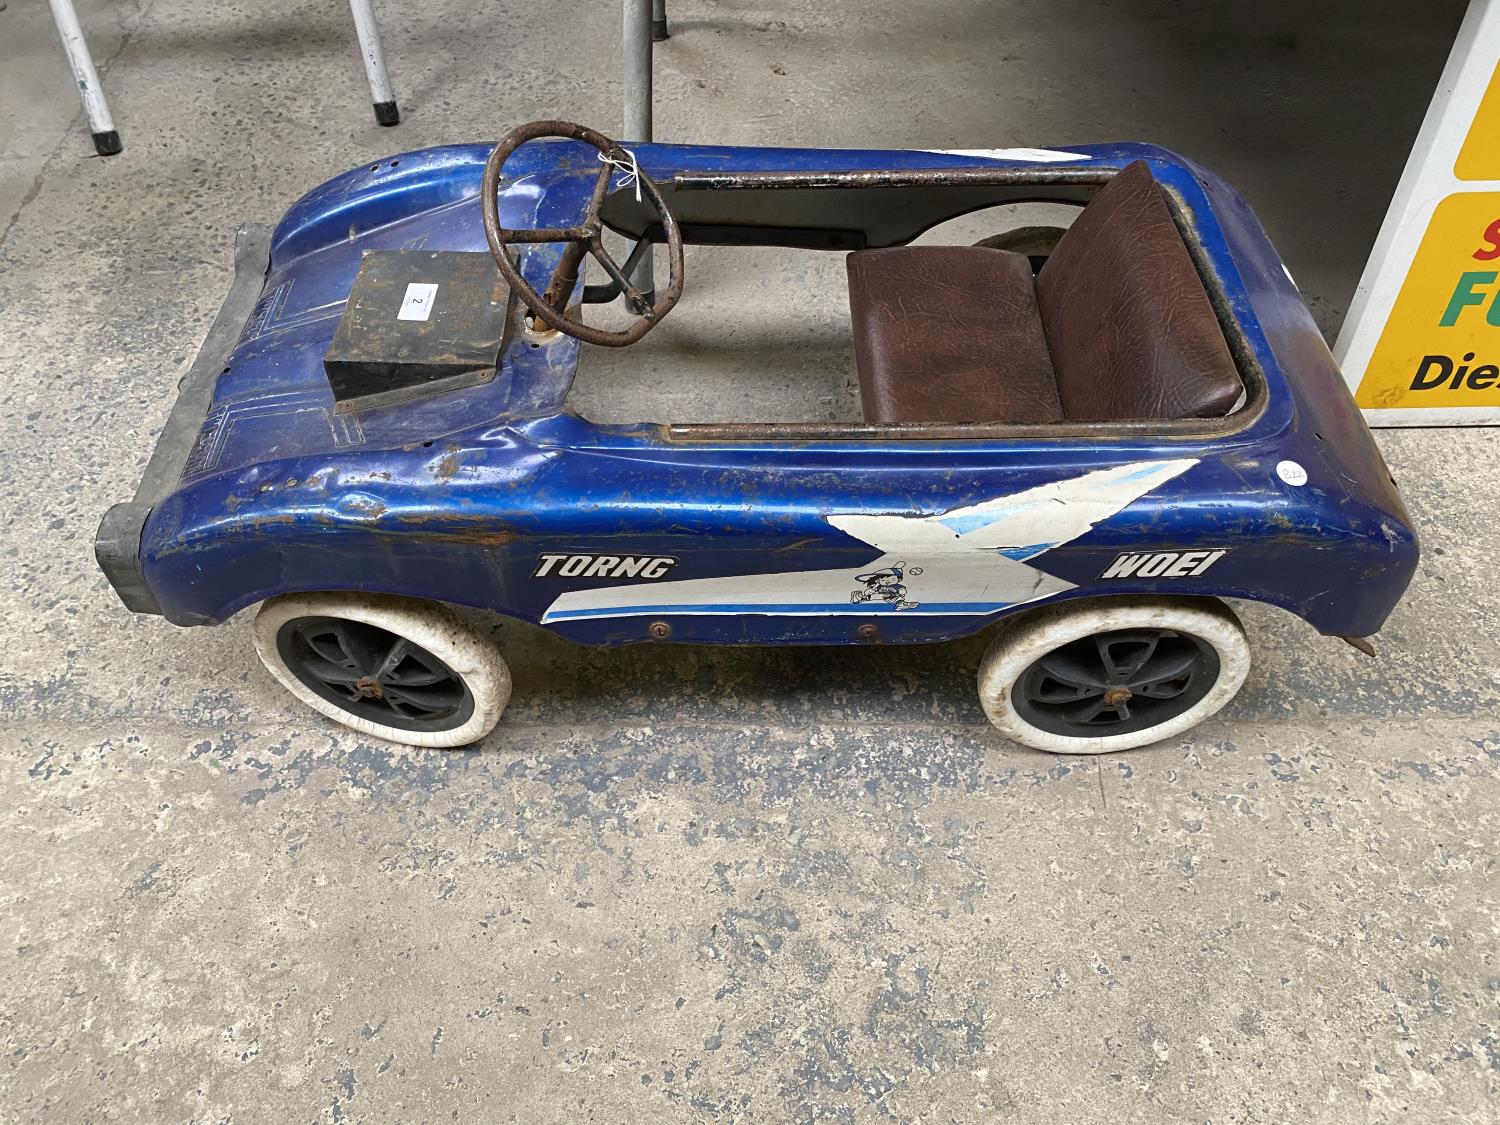 A VINTAGE TORING WOEI CHILDRENS PEDAL RACING CAR IN BLUE - Image 4 of 5